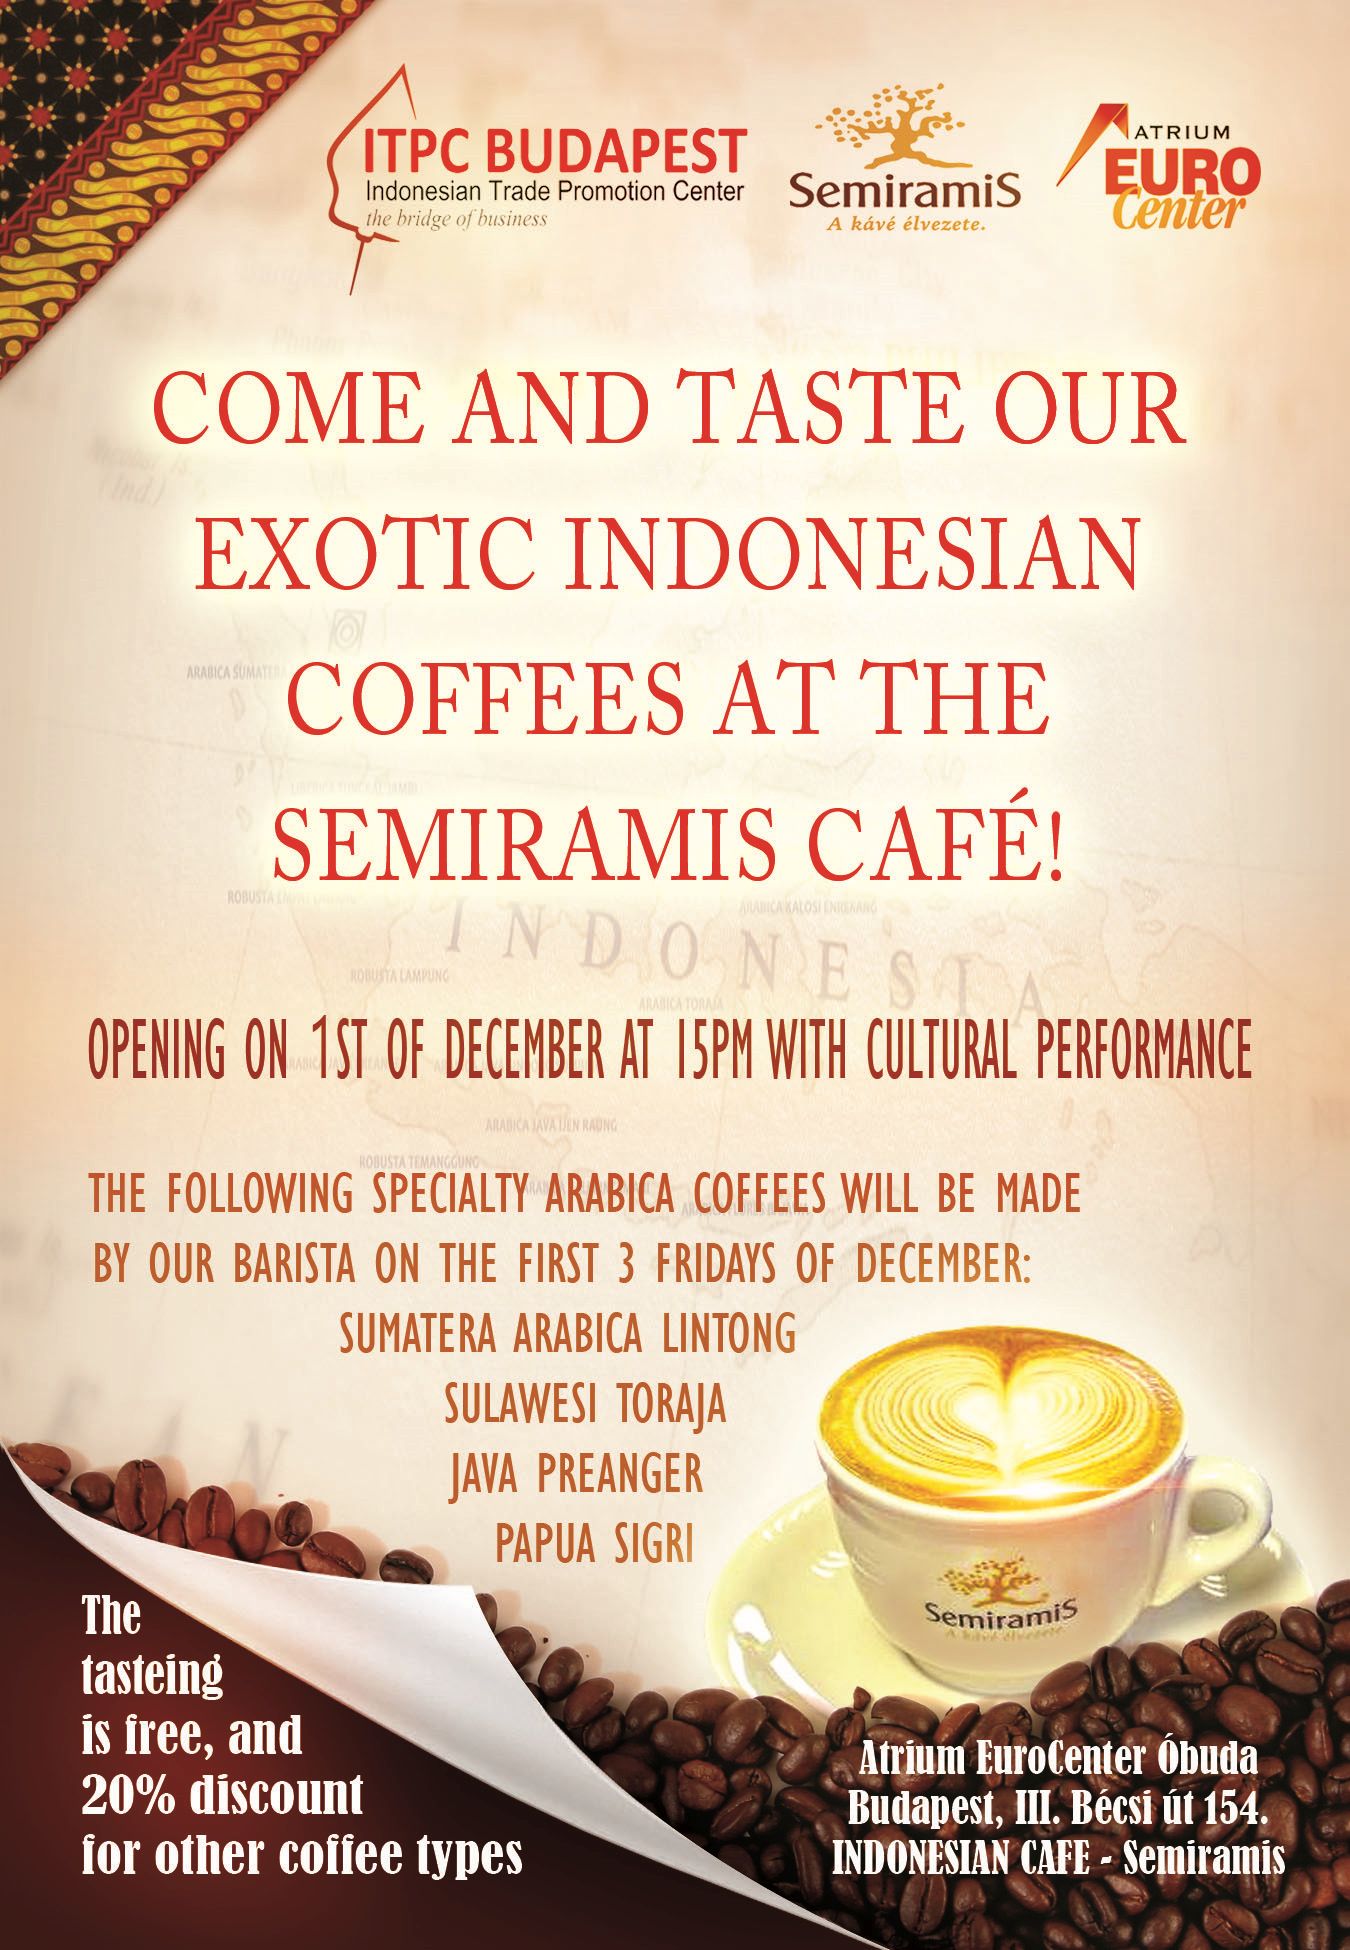 Indonesian Cafe in the Eurocenter